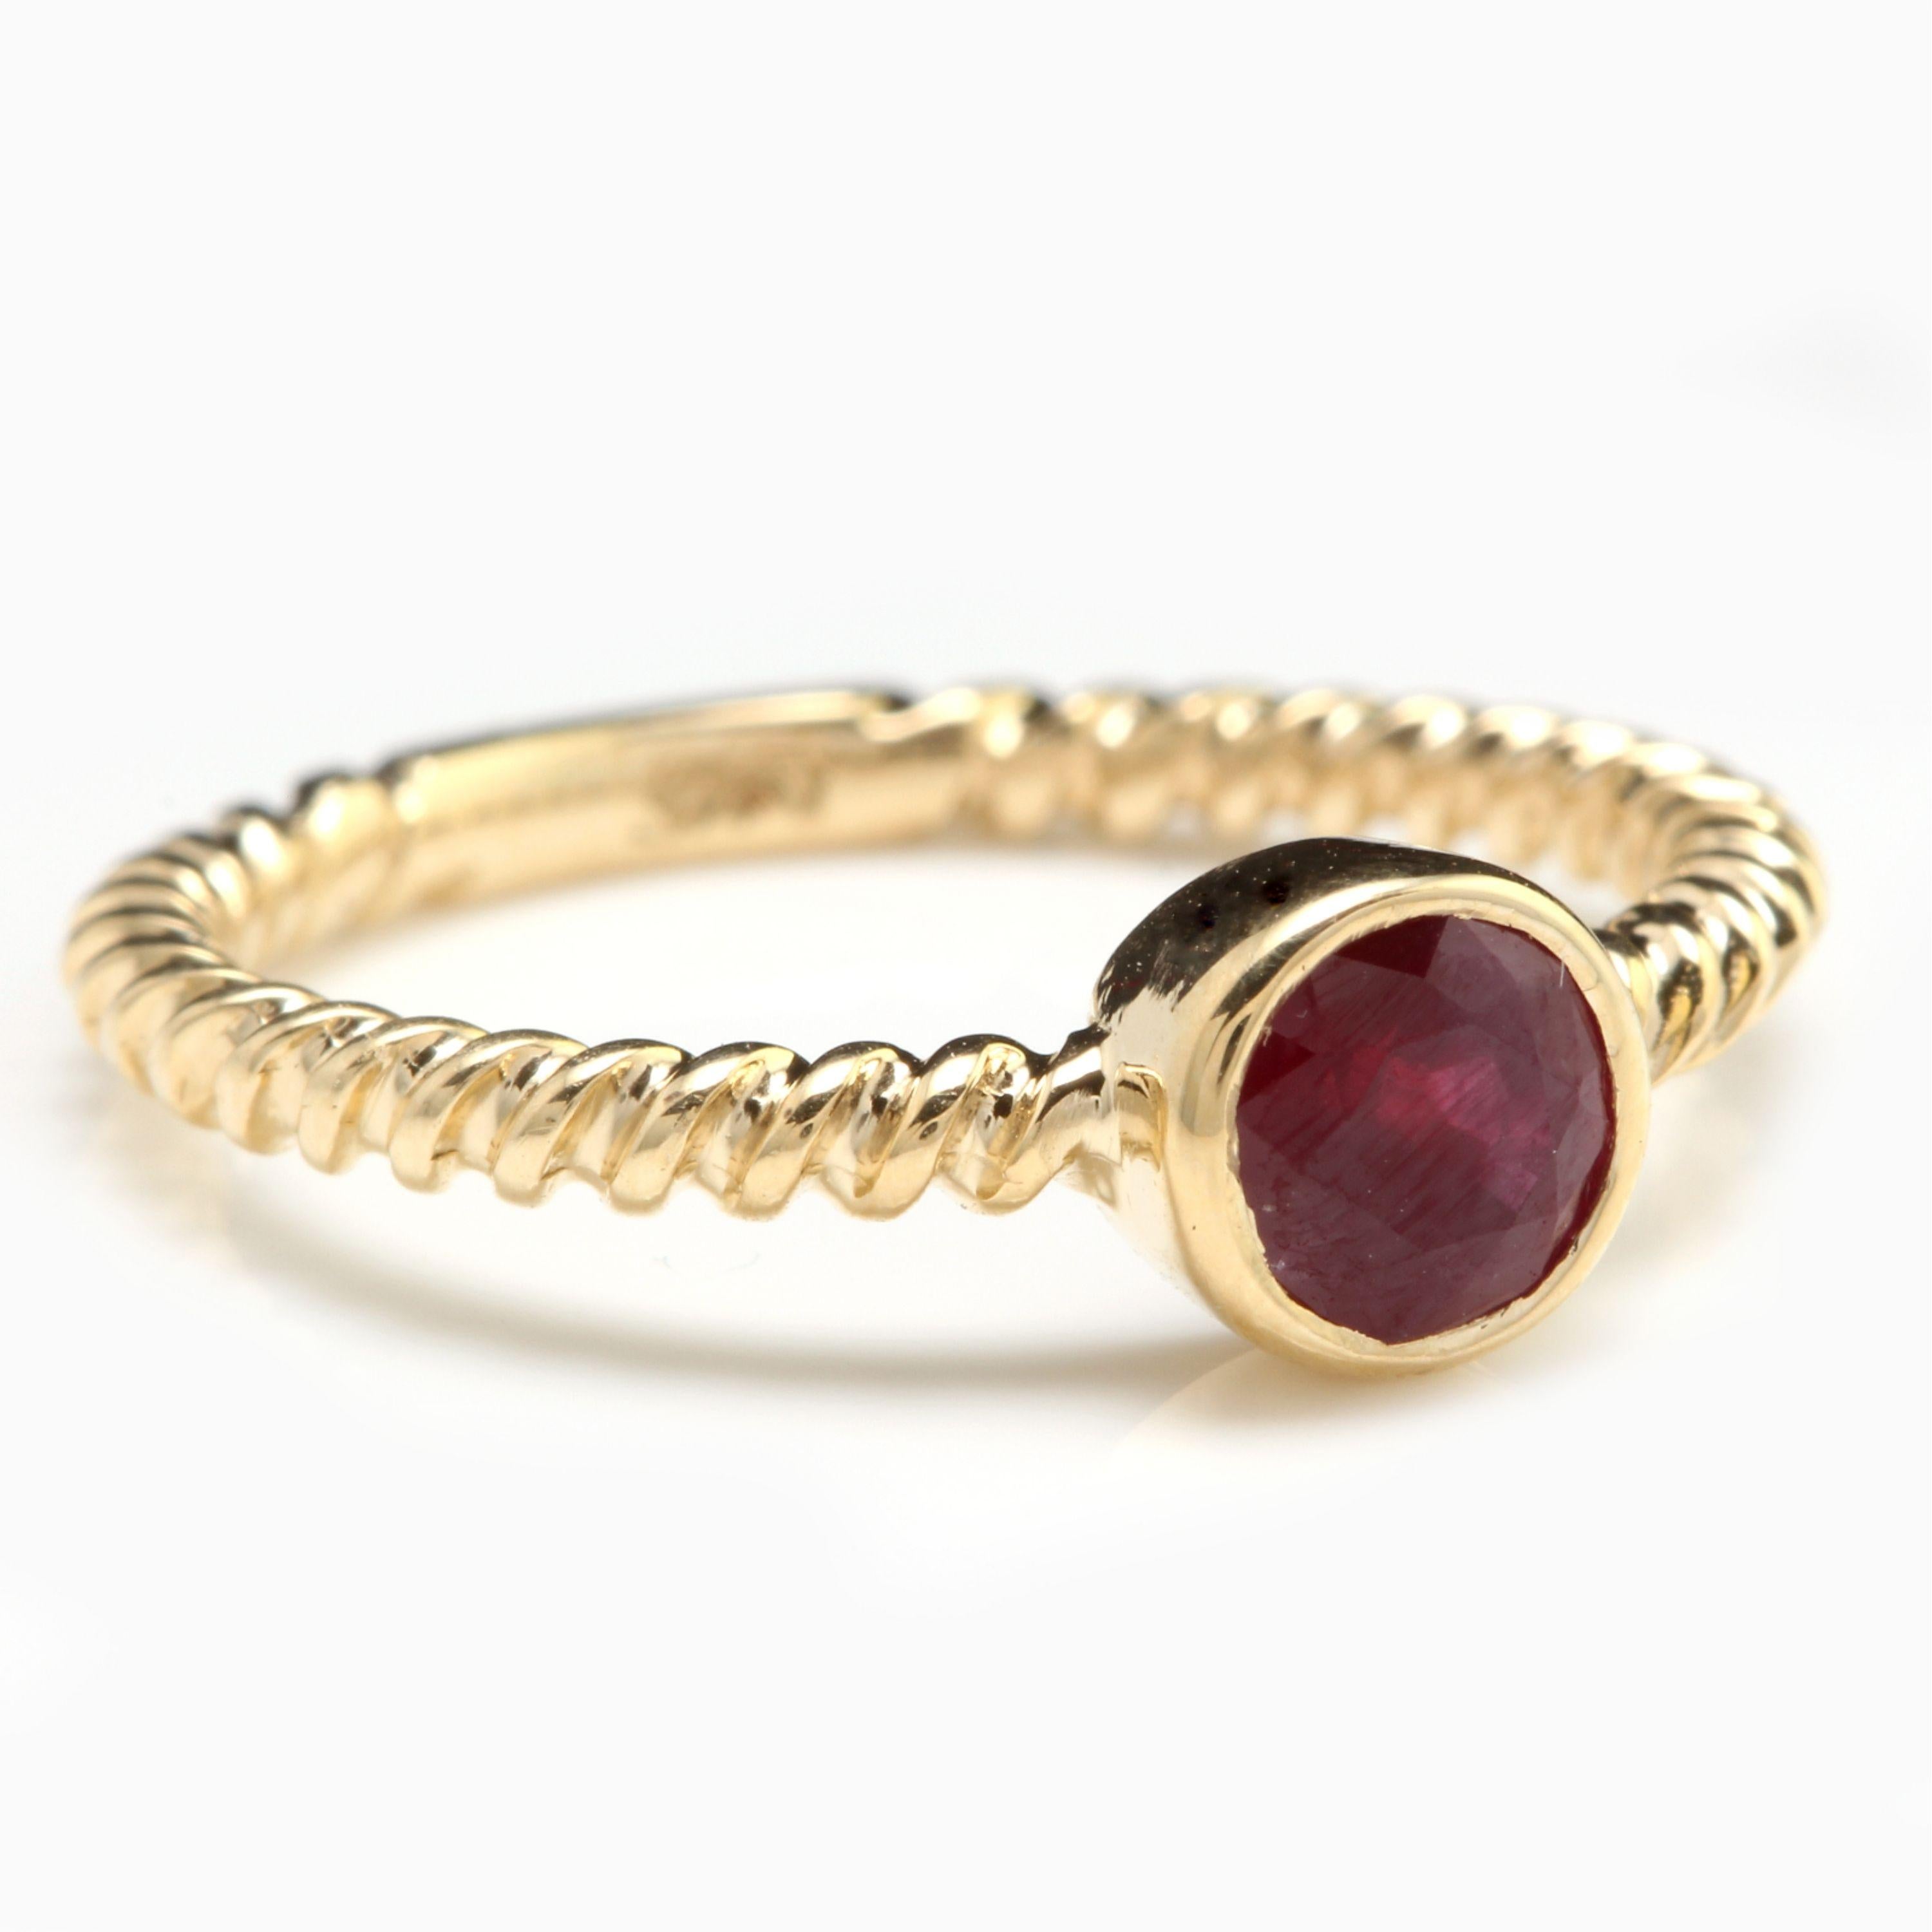 0.80 Carats Exquisite Natural Ruby 14K Solid Yellow Gold Ring

Natural Round Ruby Weight is Approx. 0.80 Carats

Ruby Measures: Approx. 5.3mm

Ruby Treatment: Heating

Ring size: 7 (we offer free re-sizing upon request)

Ring total weight: 2.4